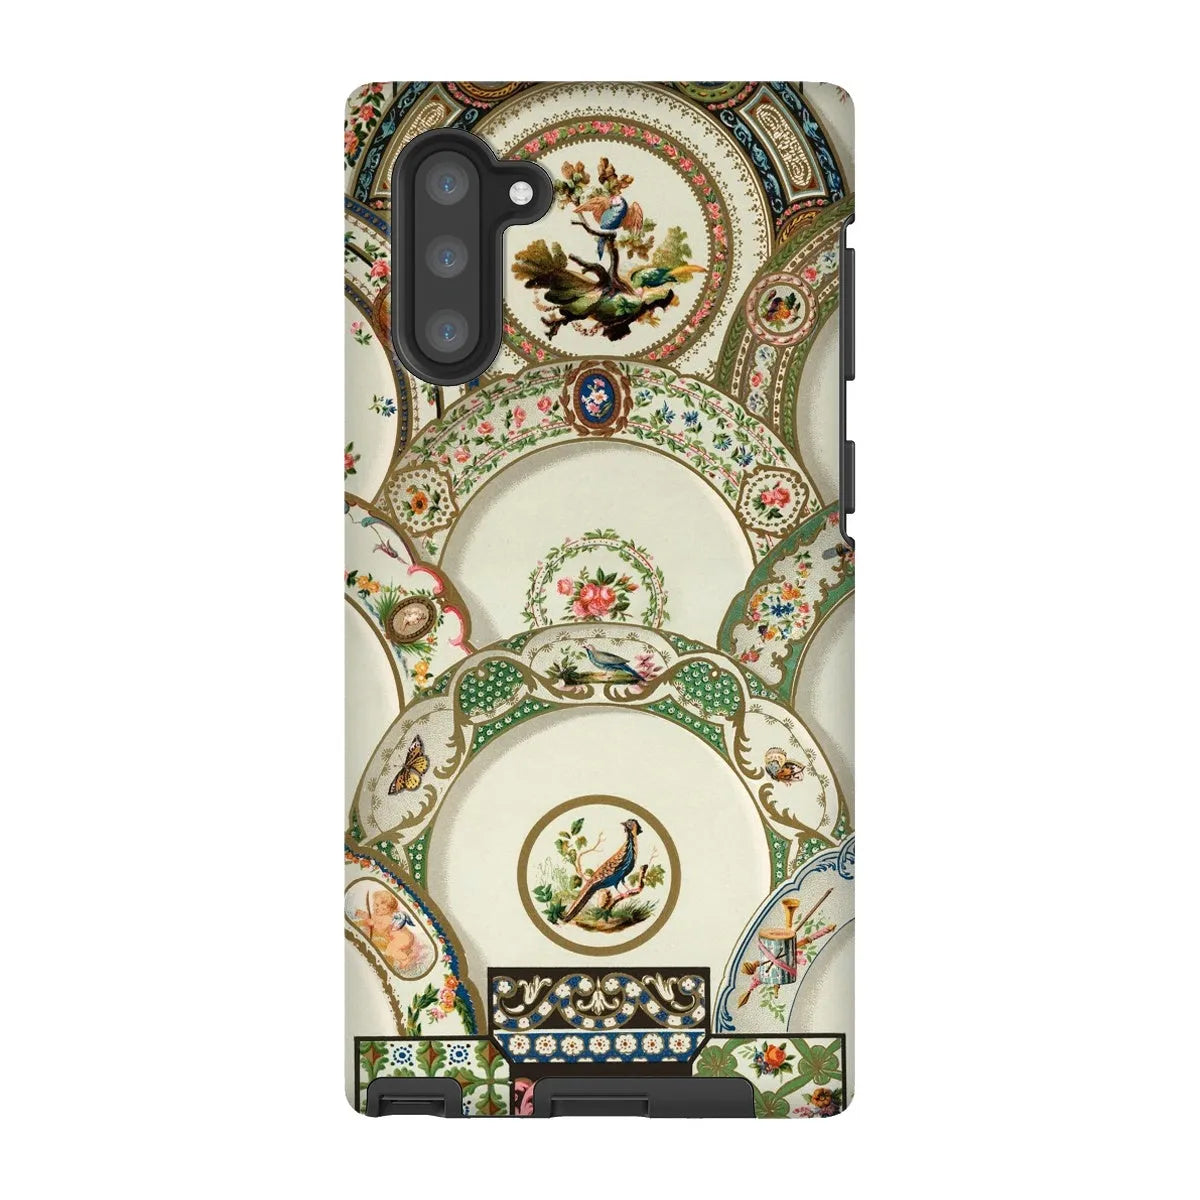 Decorative Plates By Auguste Racinet Tough Phone Case - Samsung Galaxy Note 10 / Matte - Mobile Phone Cases - Aesthetic